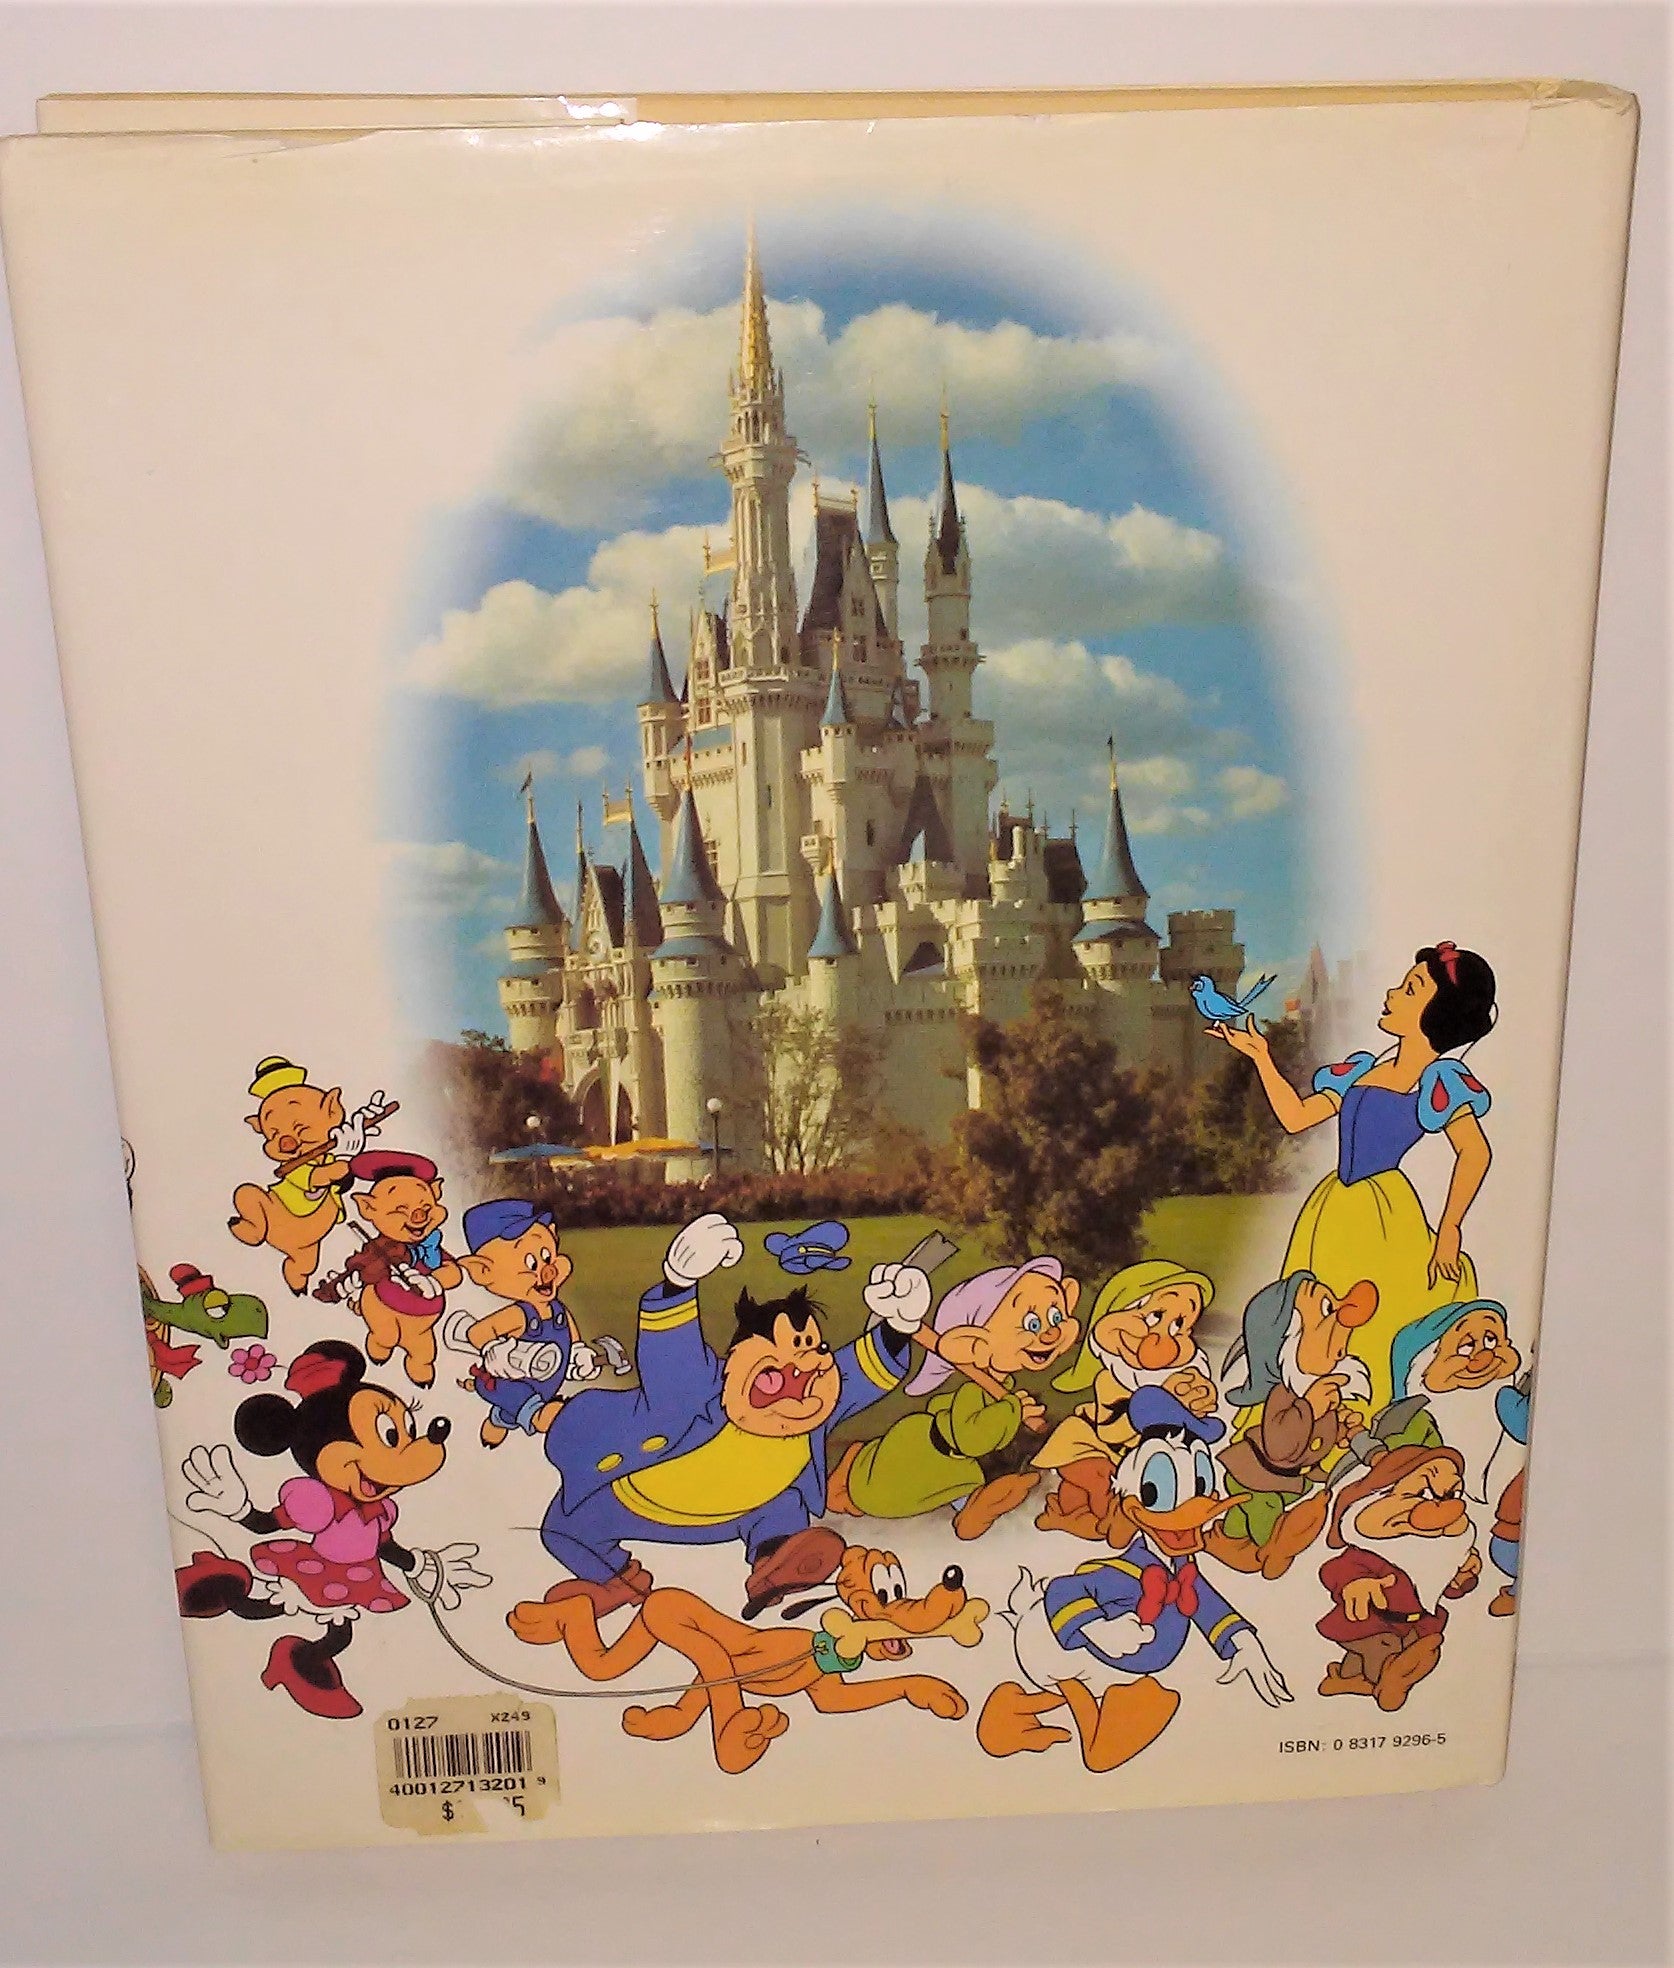 Walt Disney's World of Fantasy book by Adrian Bailey from 1987 Hardcover  Printed in Spain